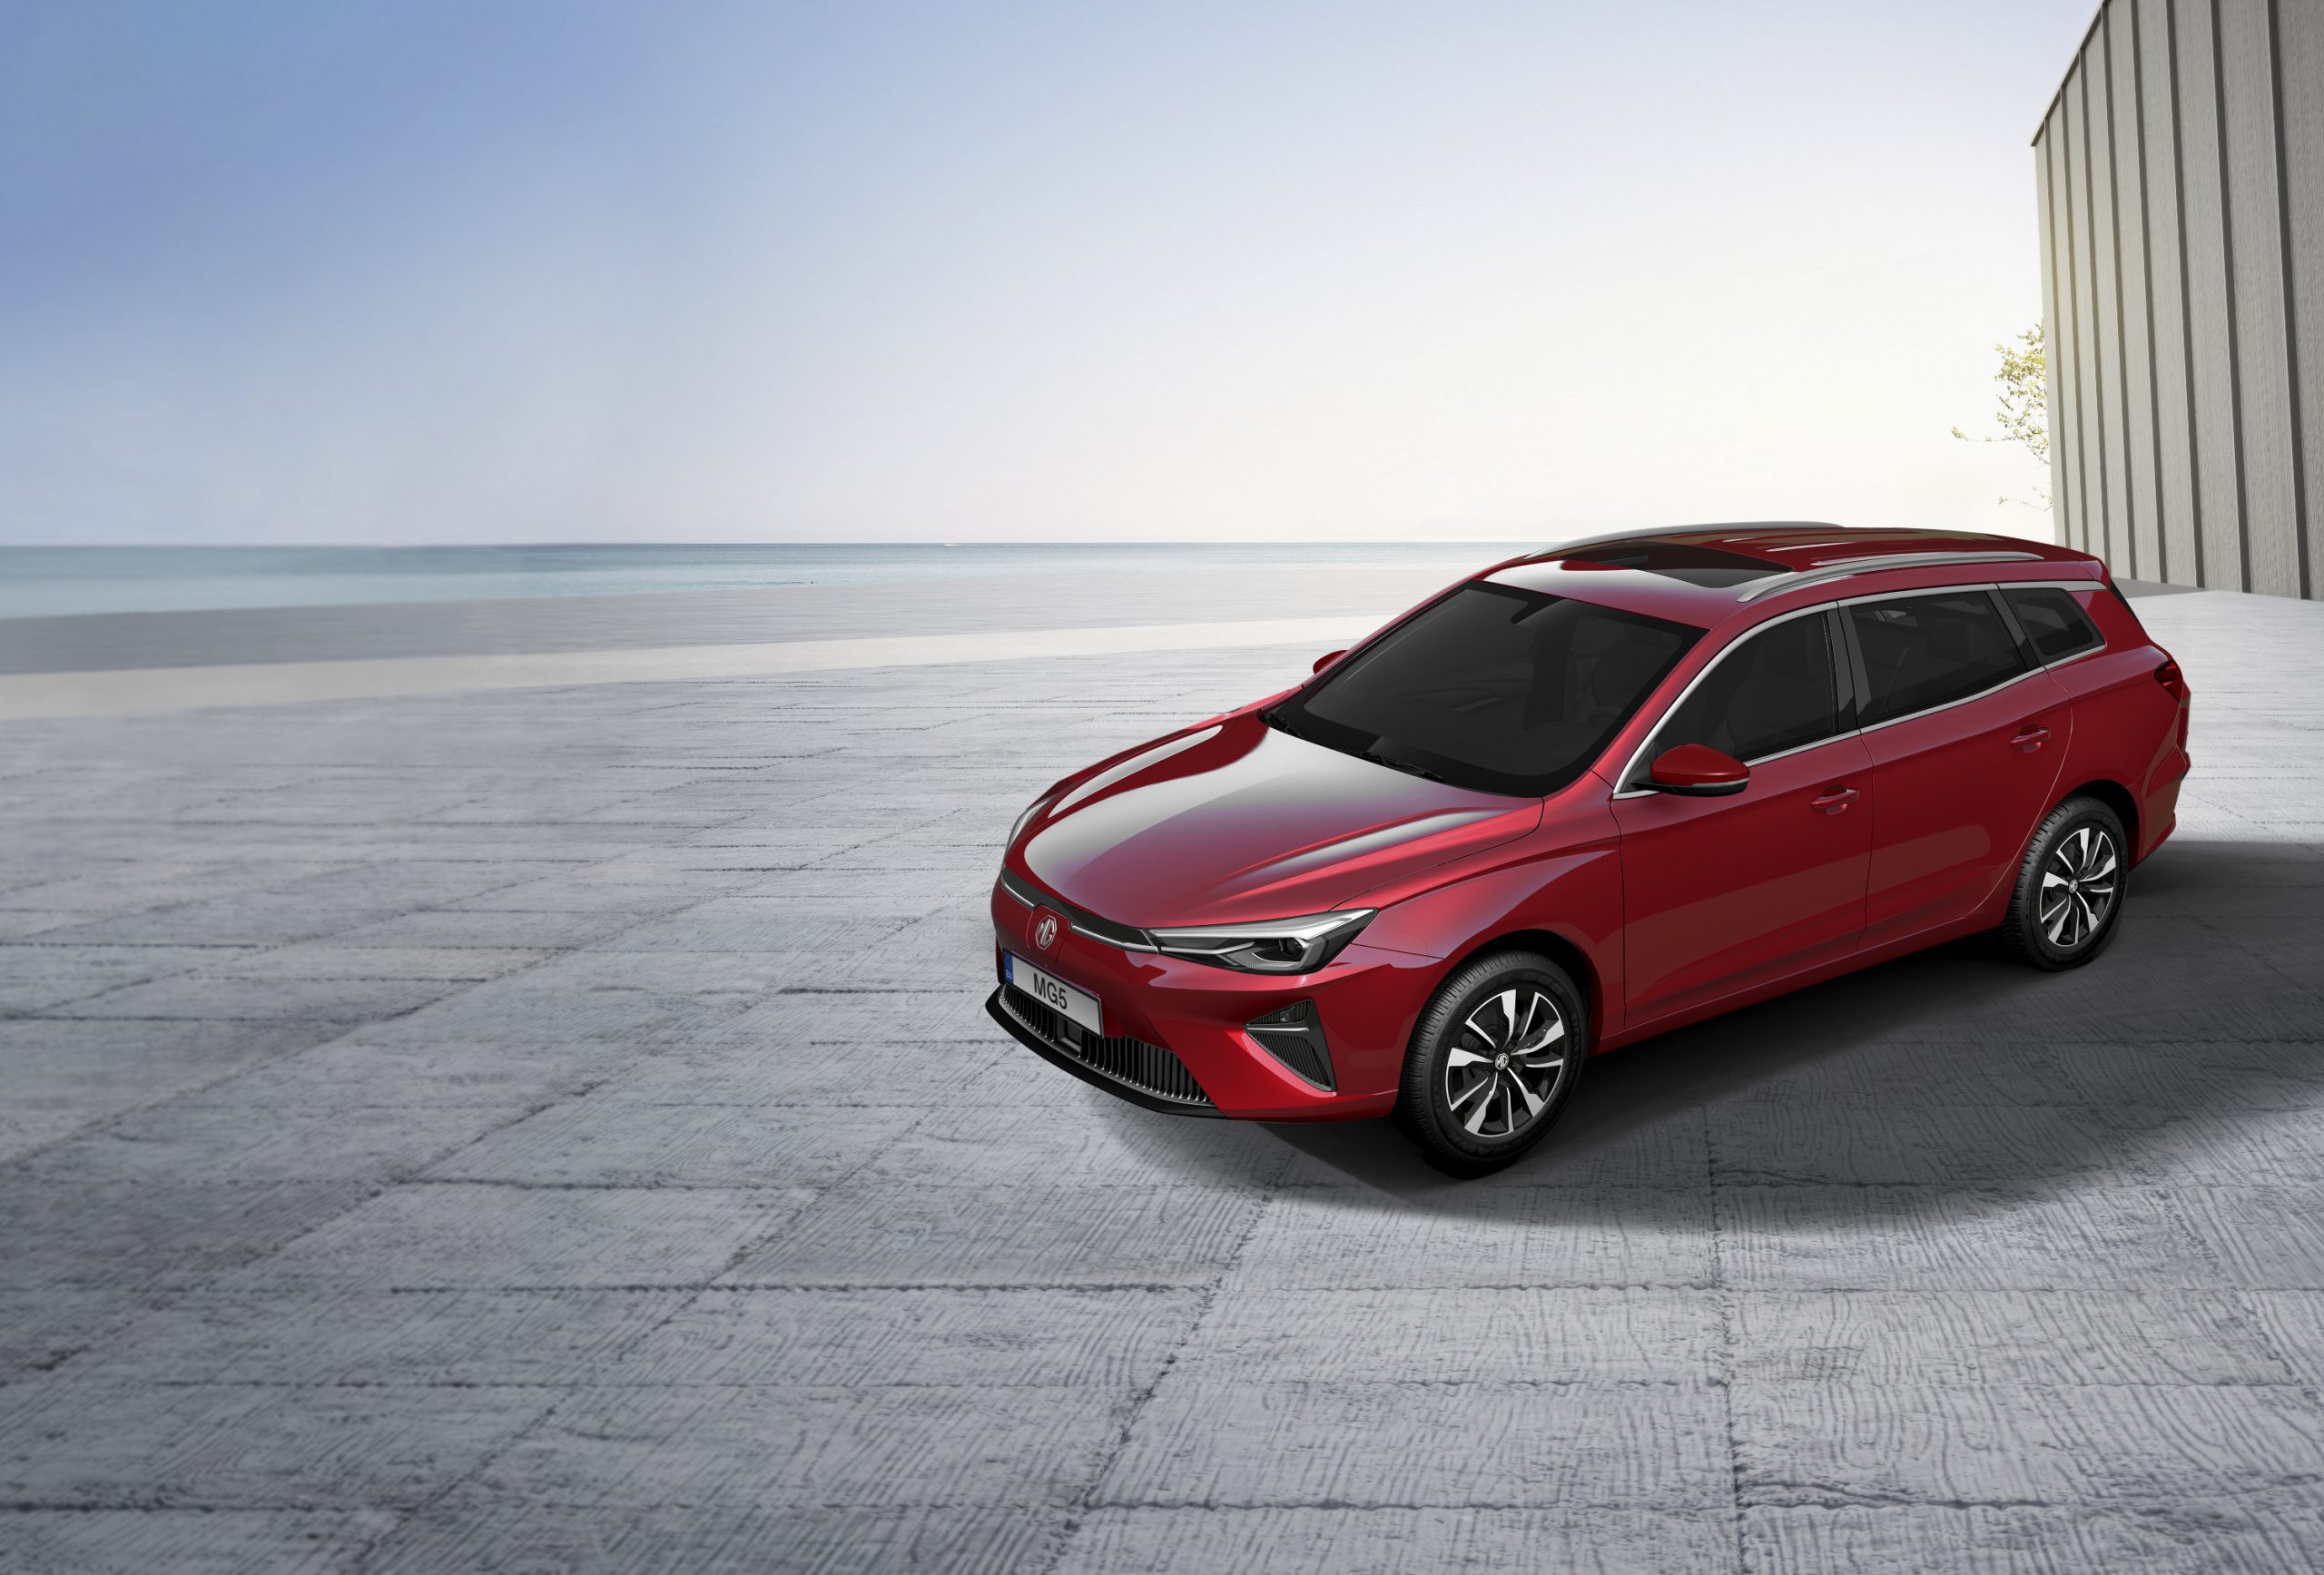 MG reveals upgraded facelift MG5 EV with 249-mile range | | WhichEV.Net